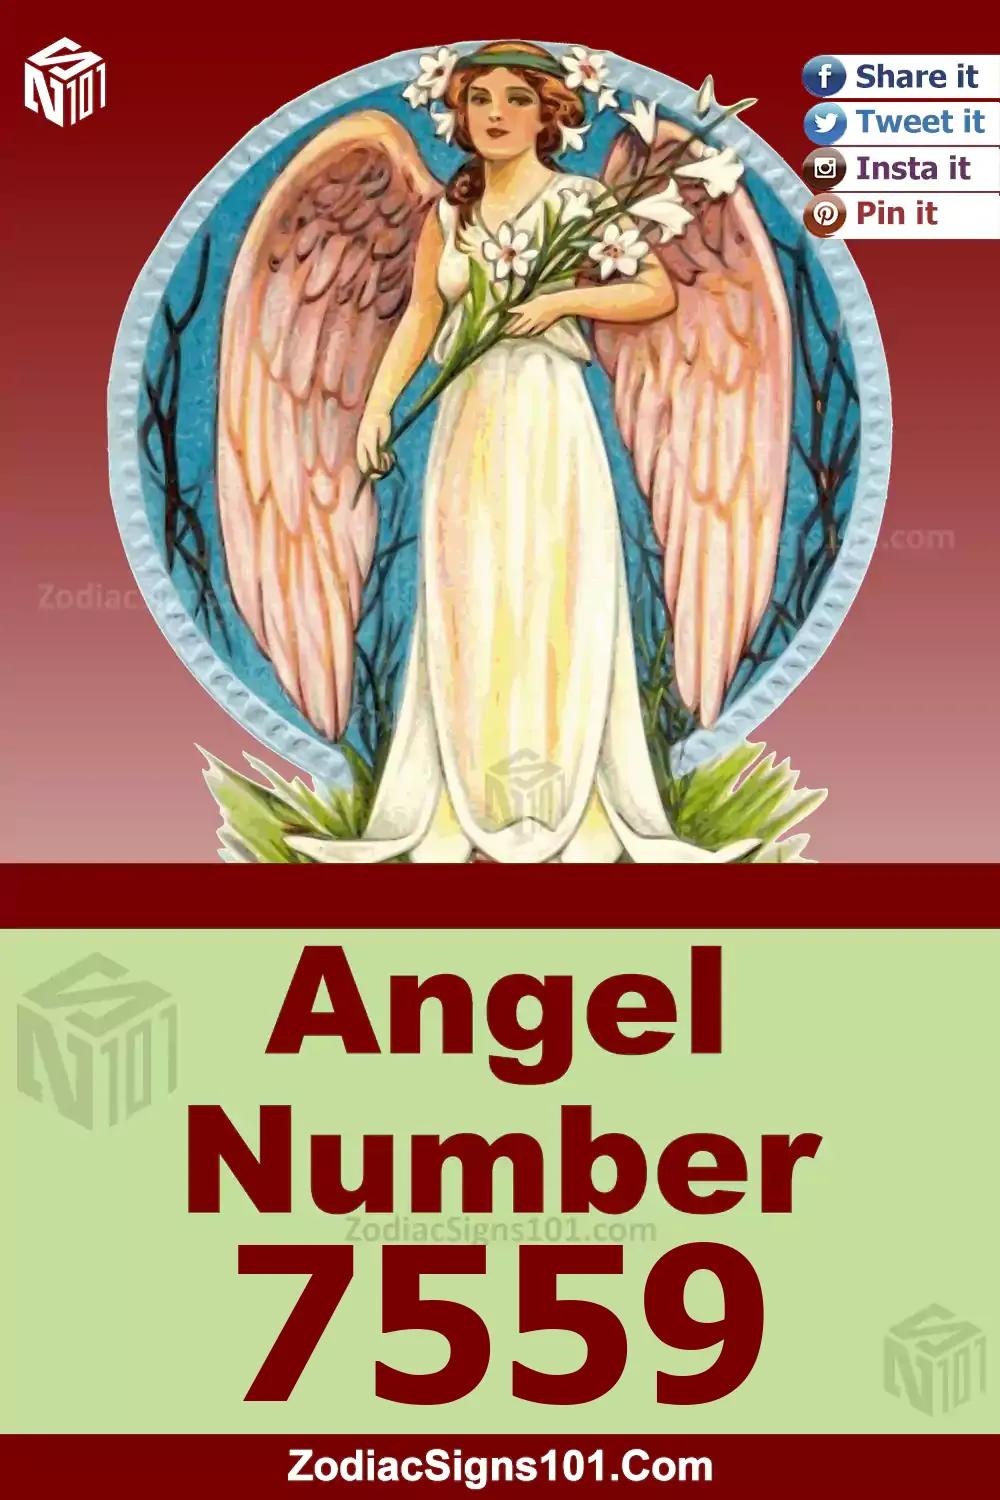 7559 Angel Number Meaning